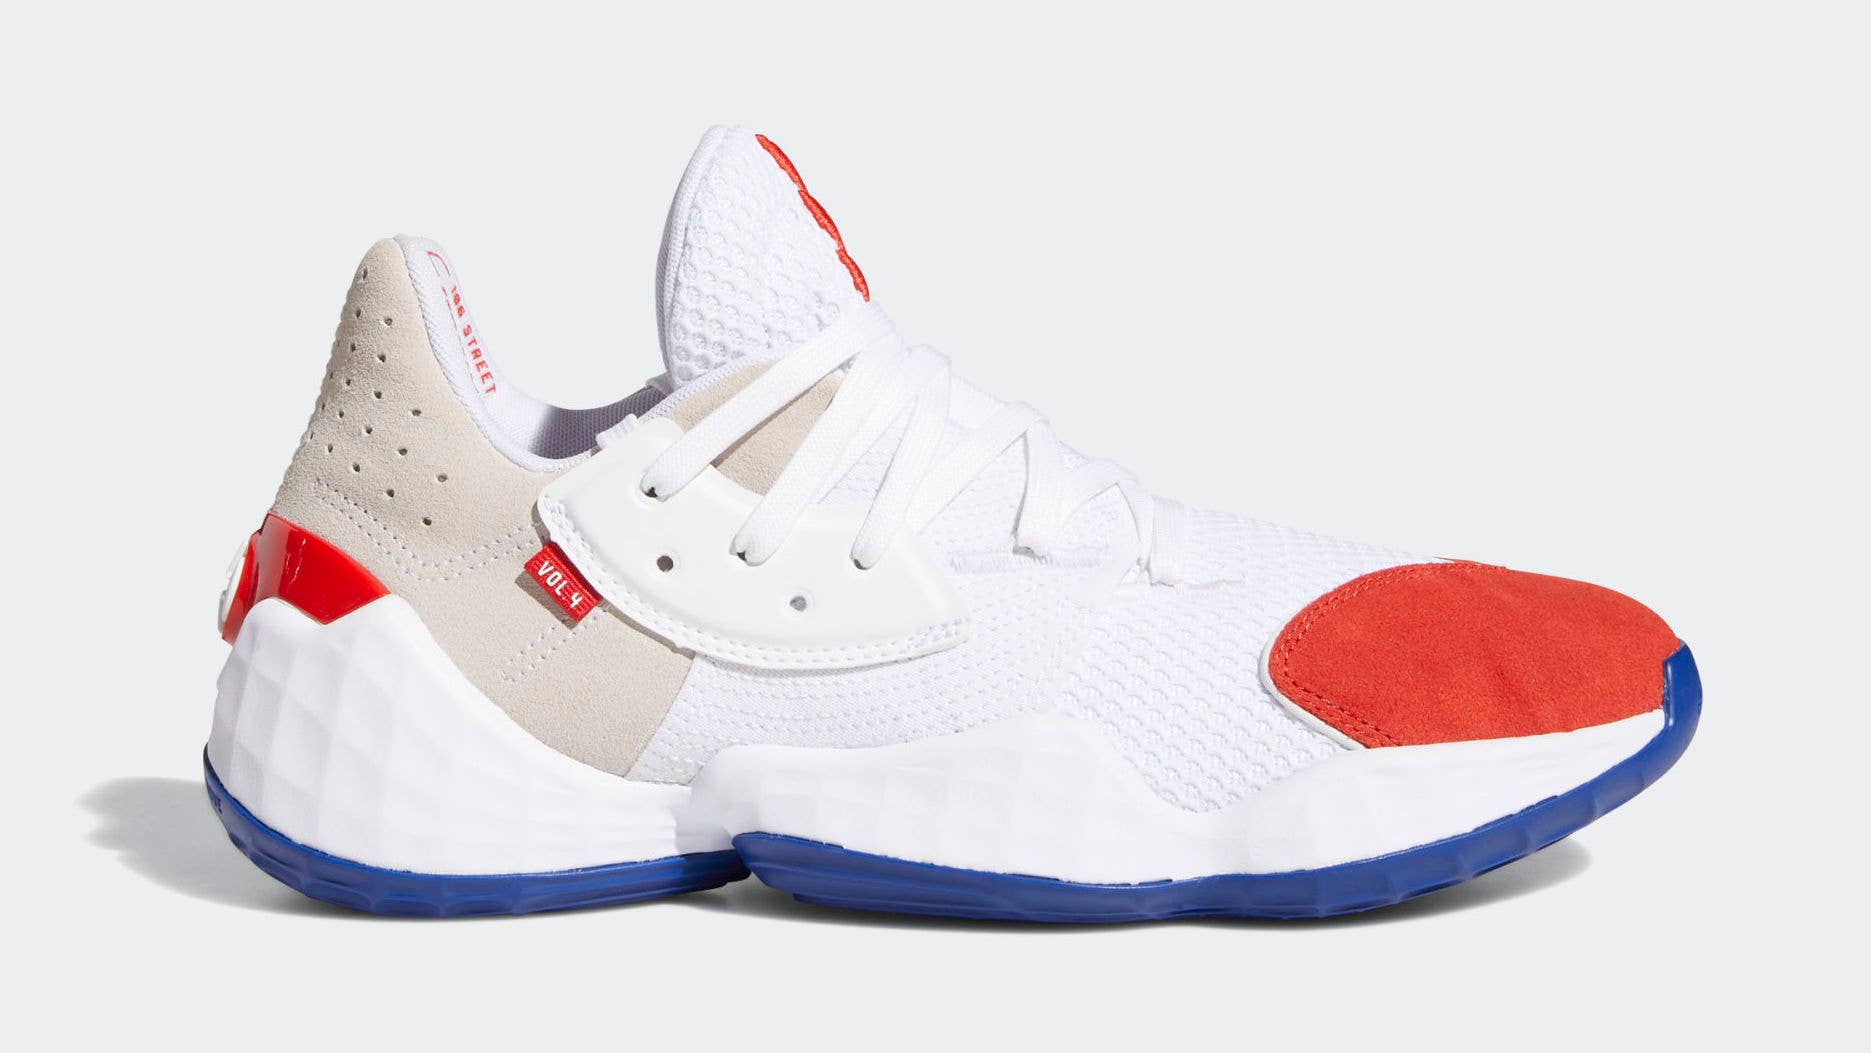 Adidas Harden Vol. 4 'Question' FV5598 Lateral